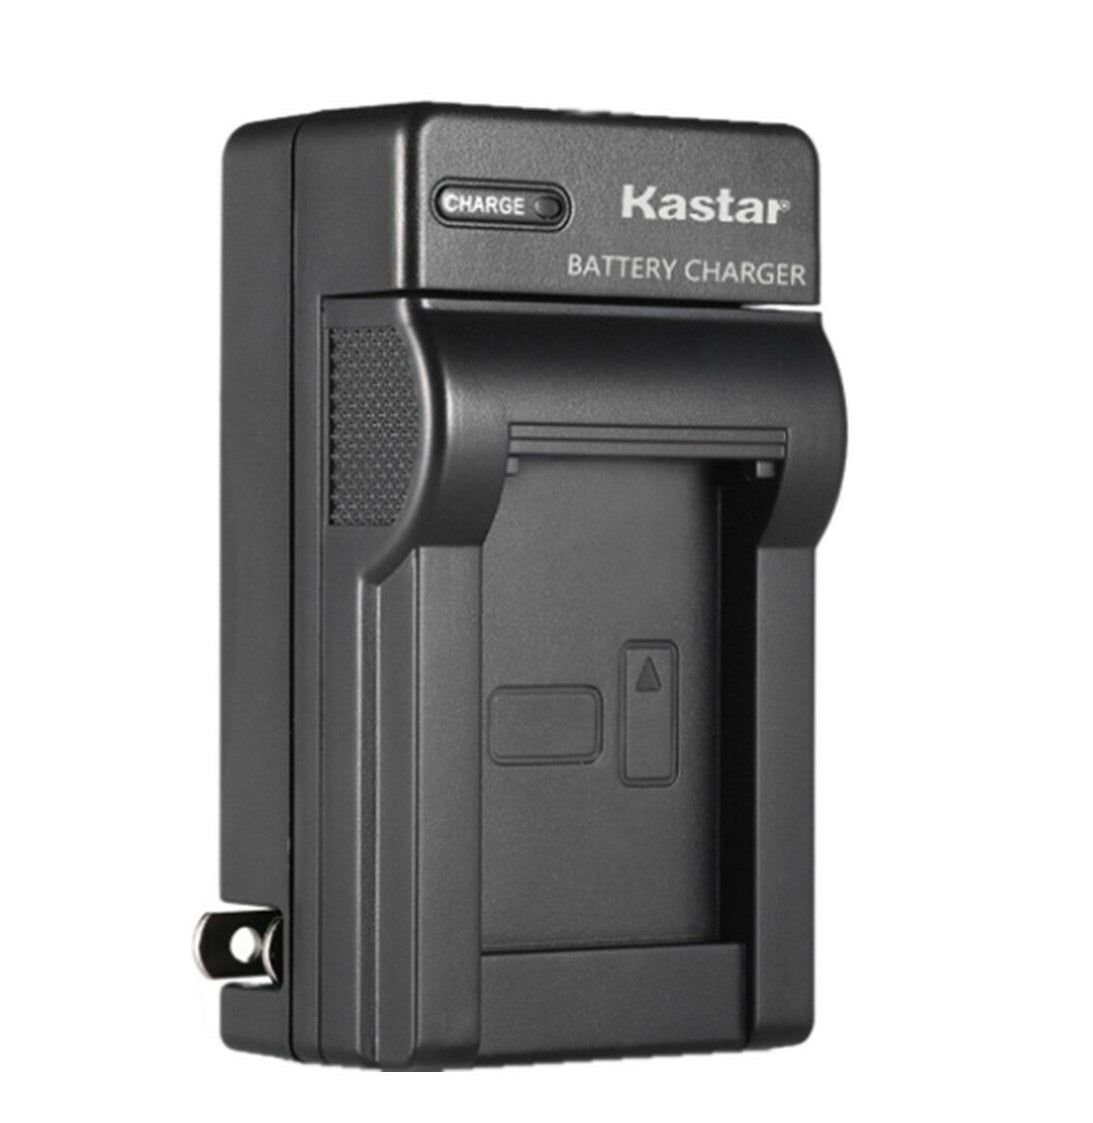 Kastar NP-F charger